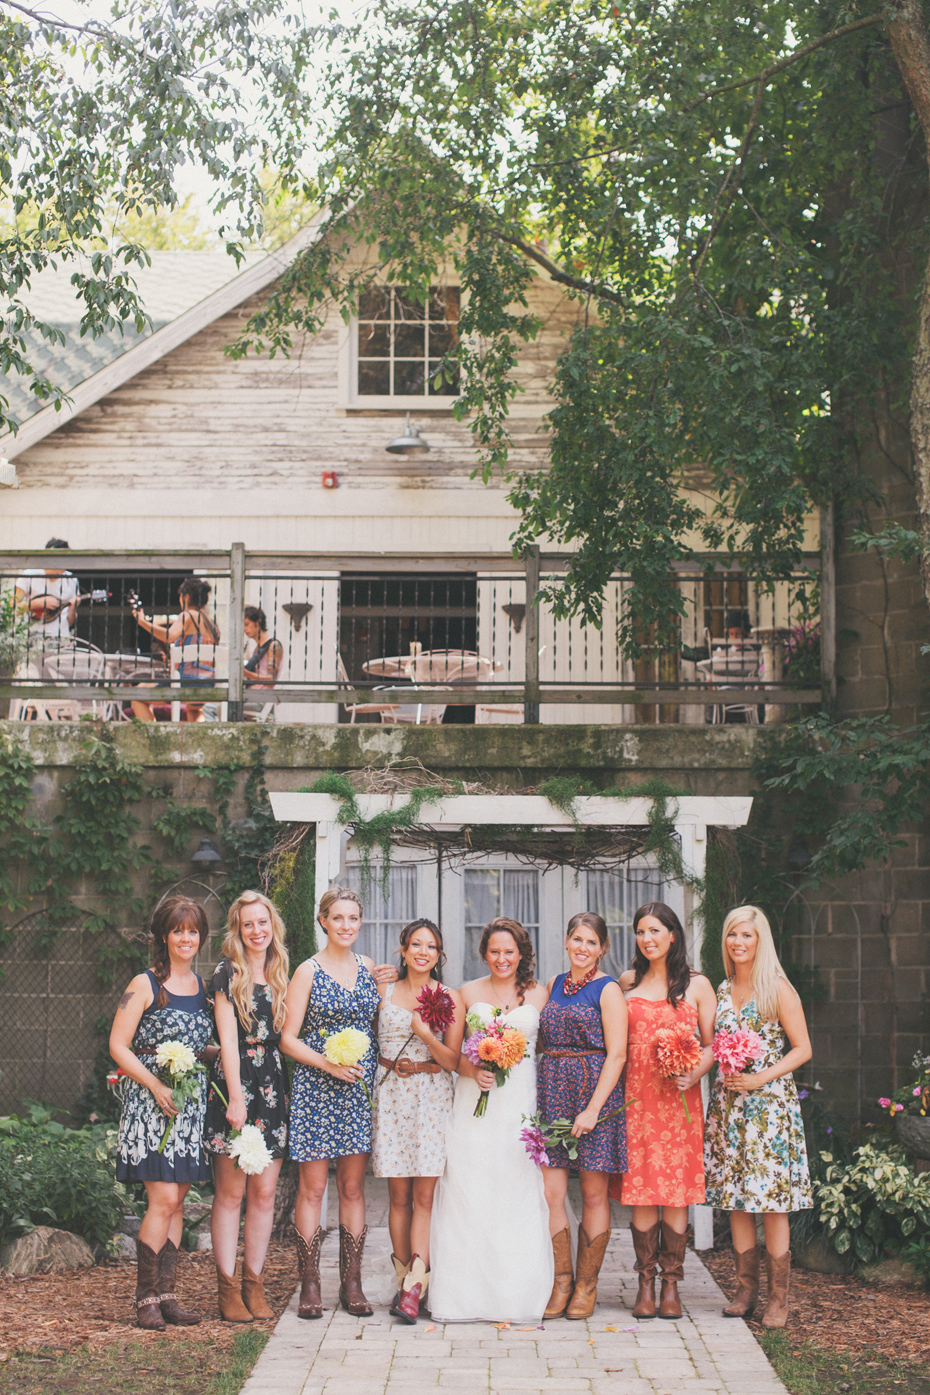 Bridesmaids in Floral Dresses and cowboy boots photographed by Ann Arbor Michigan wedding photographer Heather Jowett at the Blue Dress Barn in Benton Harbor.